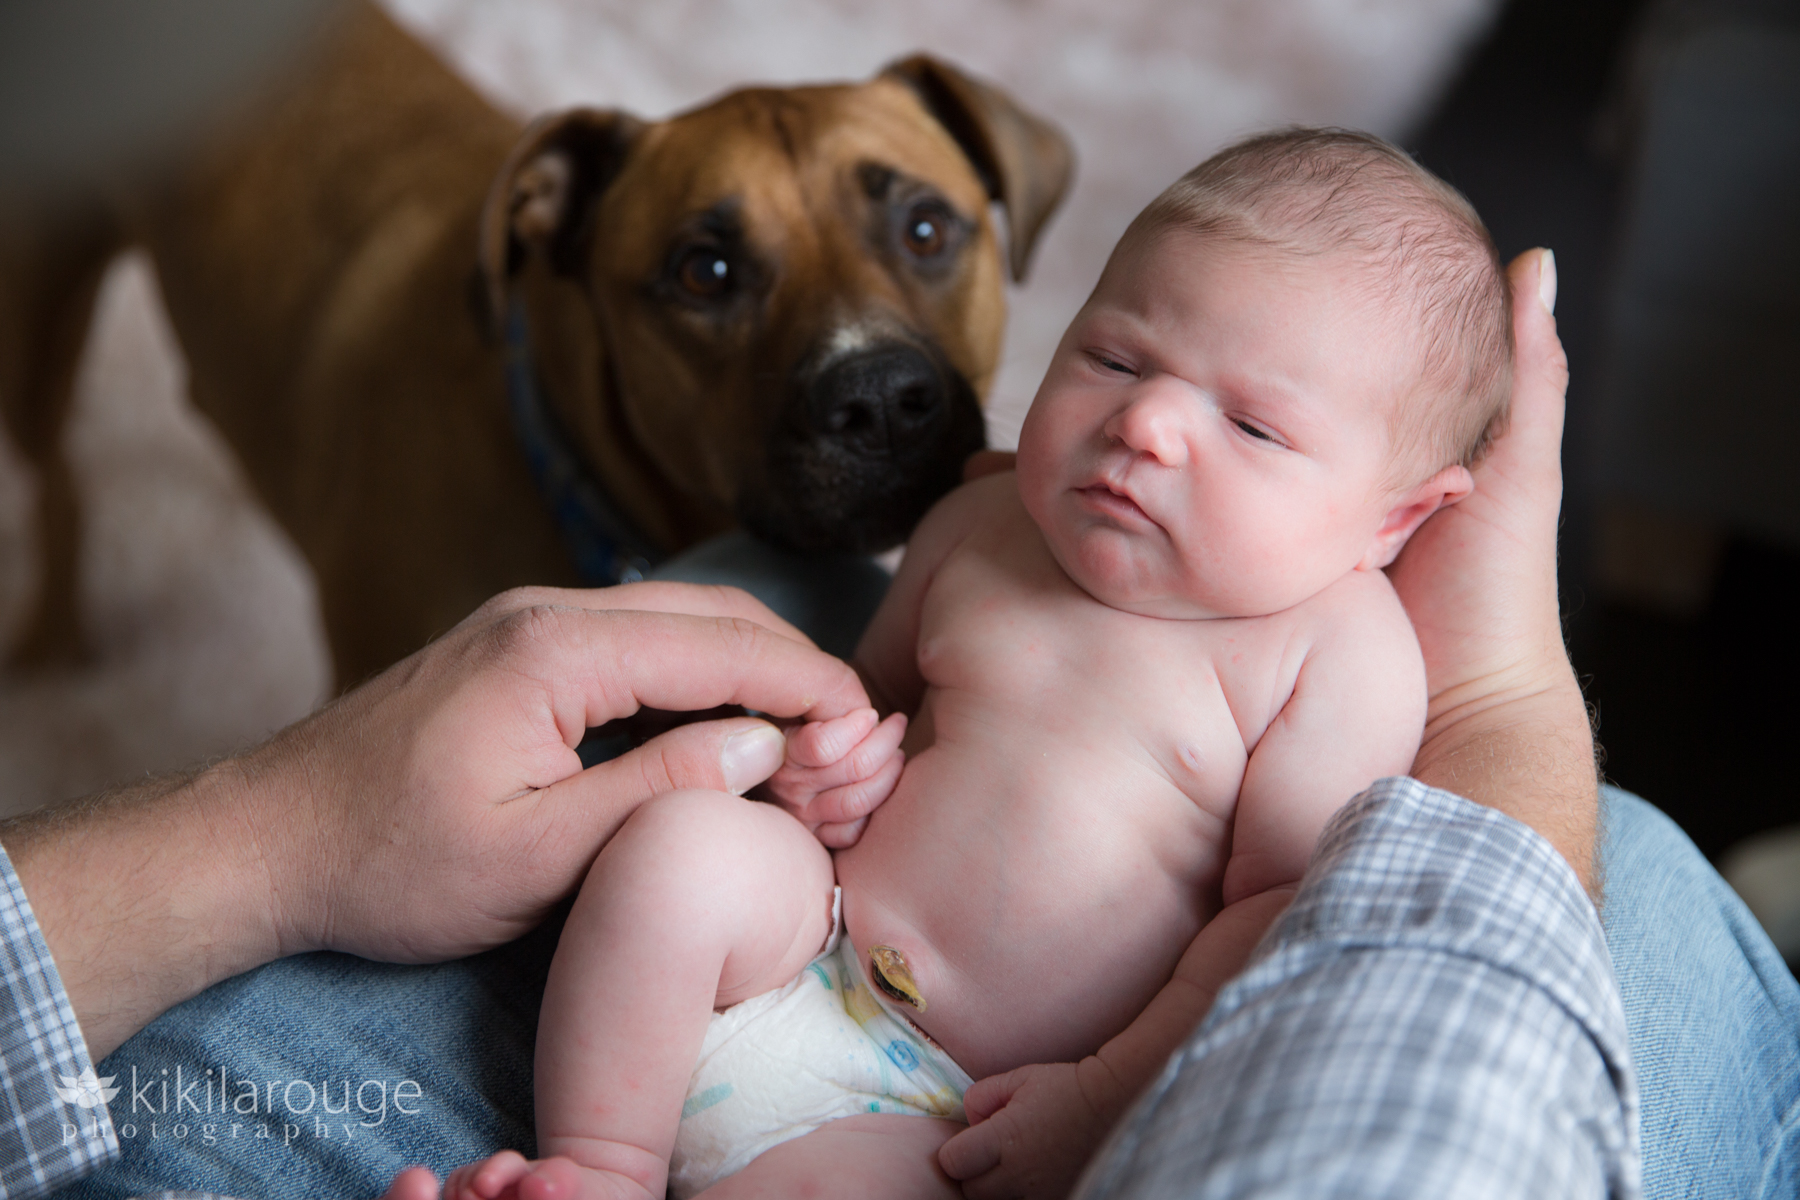 Dog giving kisses to newborn baby sister